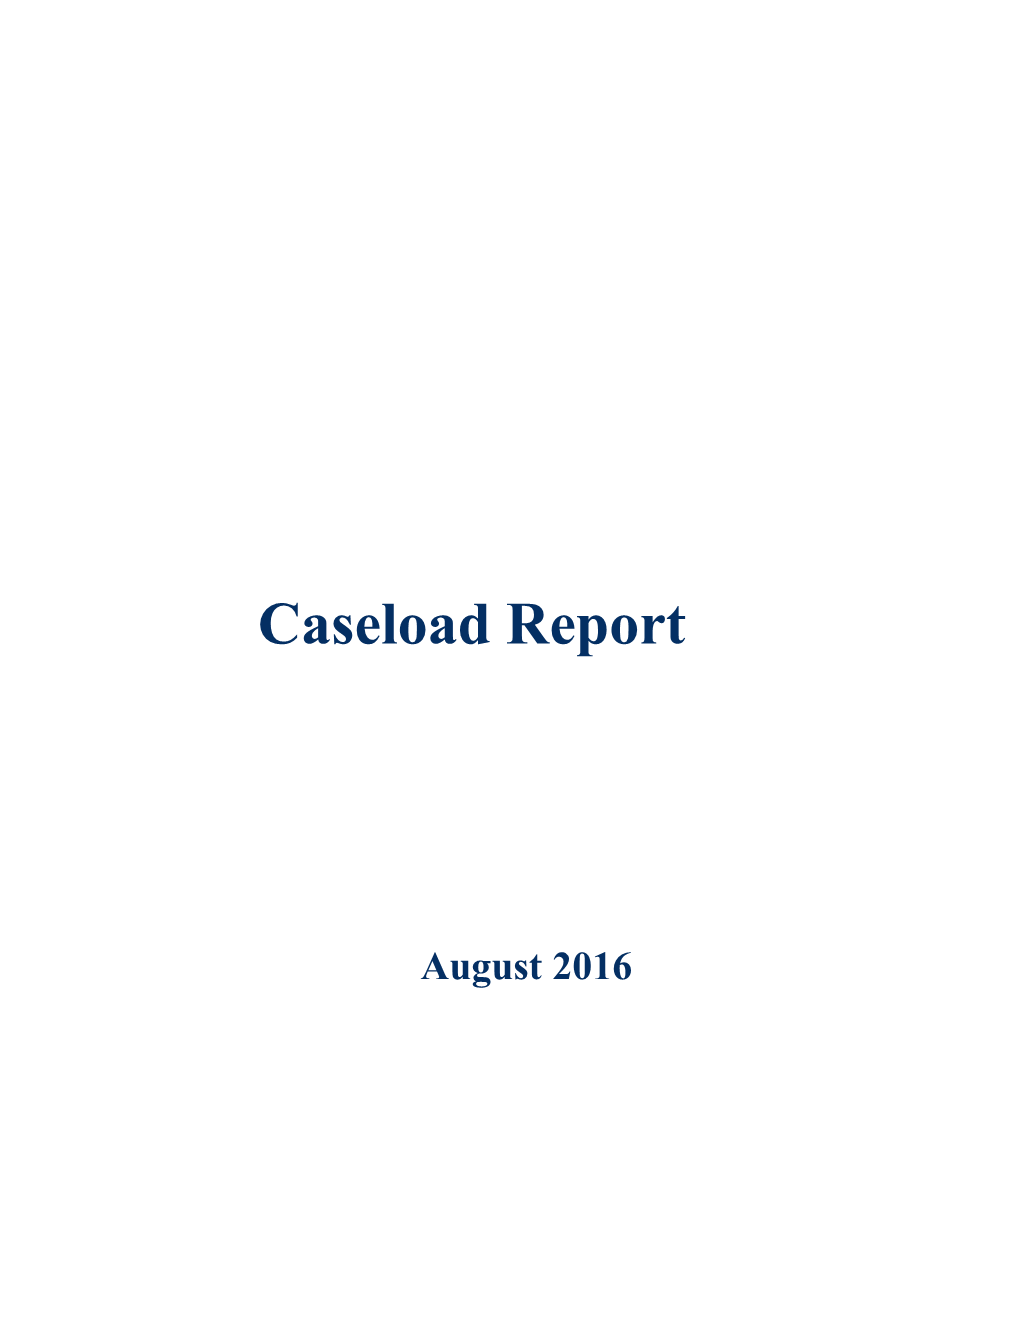 Thisreport Is Responsive to Lineitem 4800-1100Of Chapter46of Theactsof 2015Whichstates